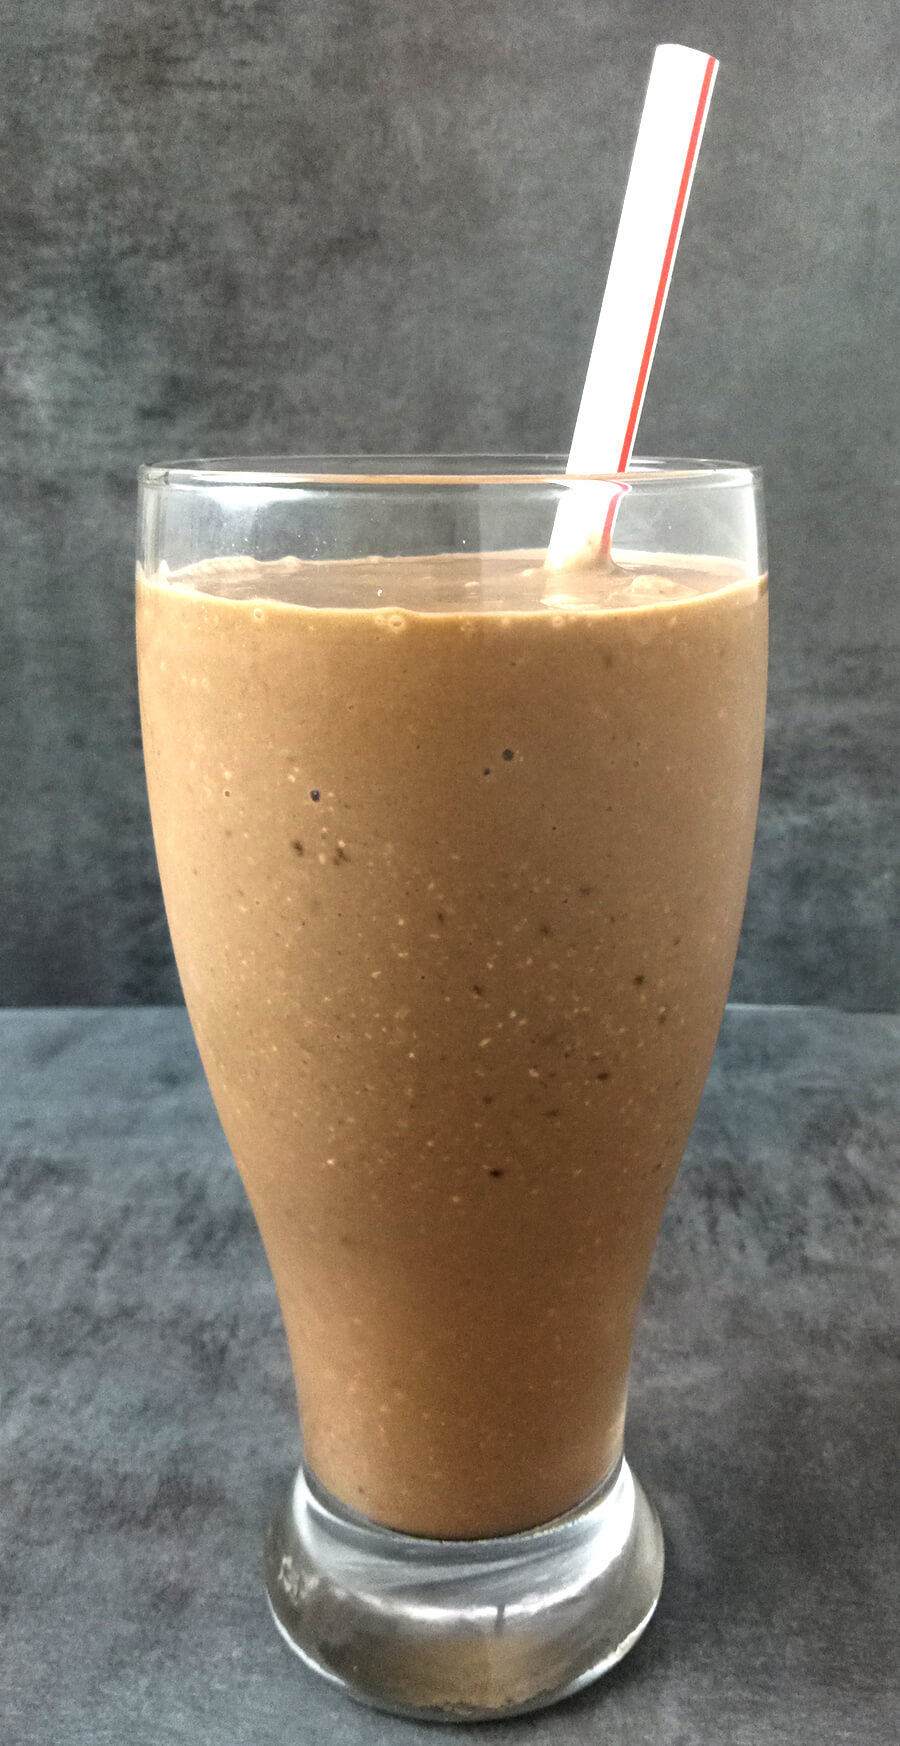 Healthy breakfast smoothies for weight loss, Avocado Banana Oatmeal smoothie, chocolate smoothie